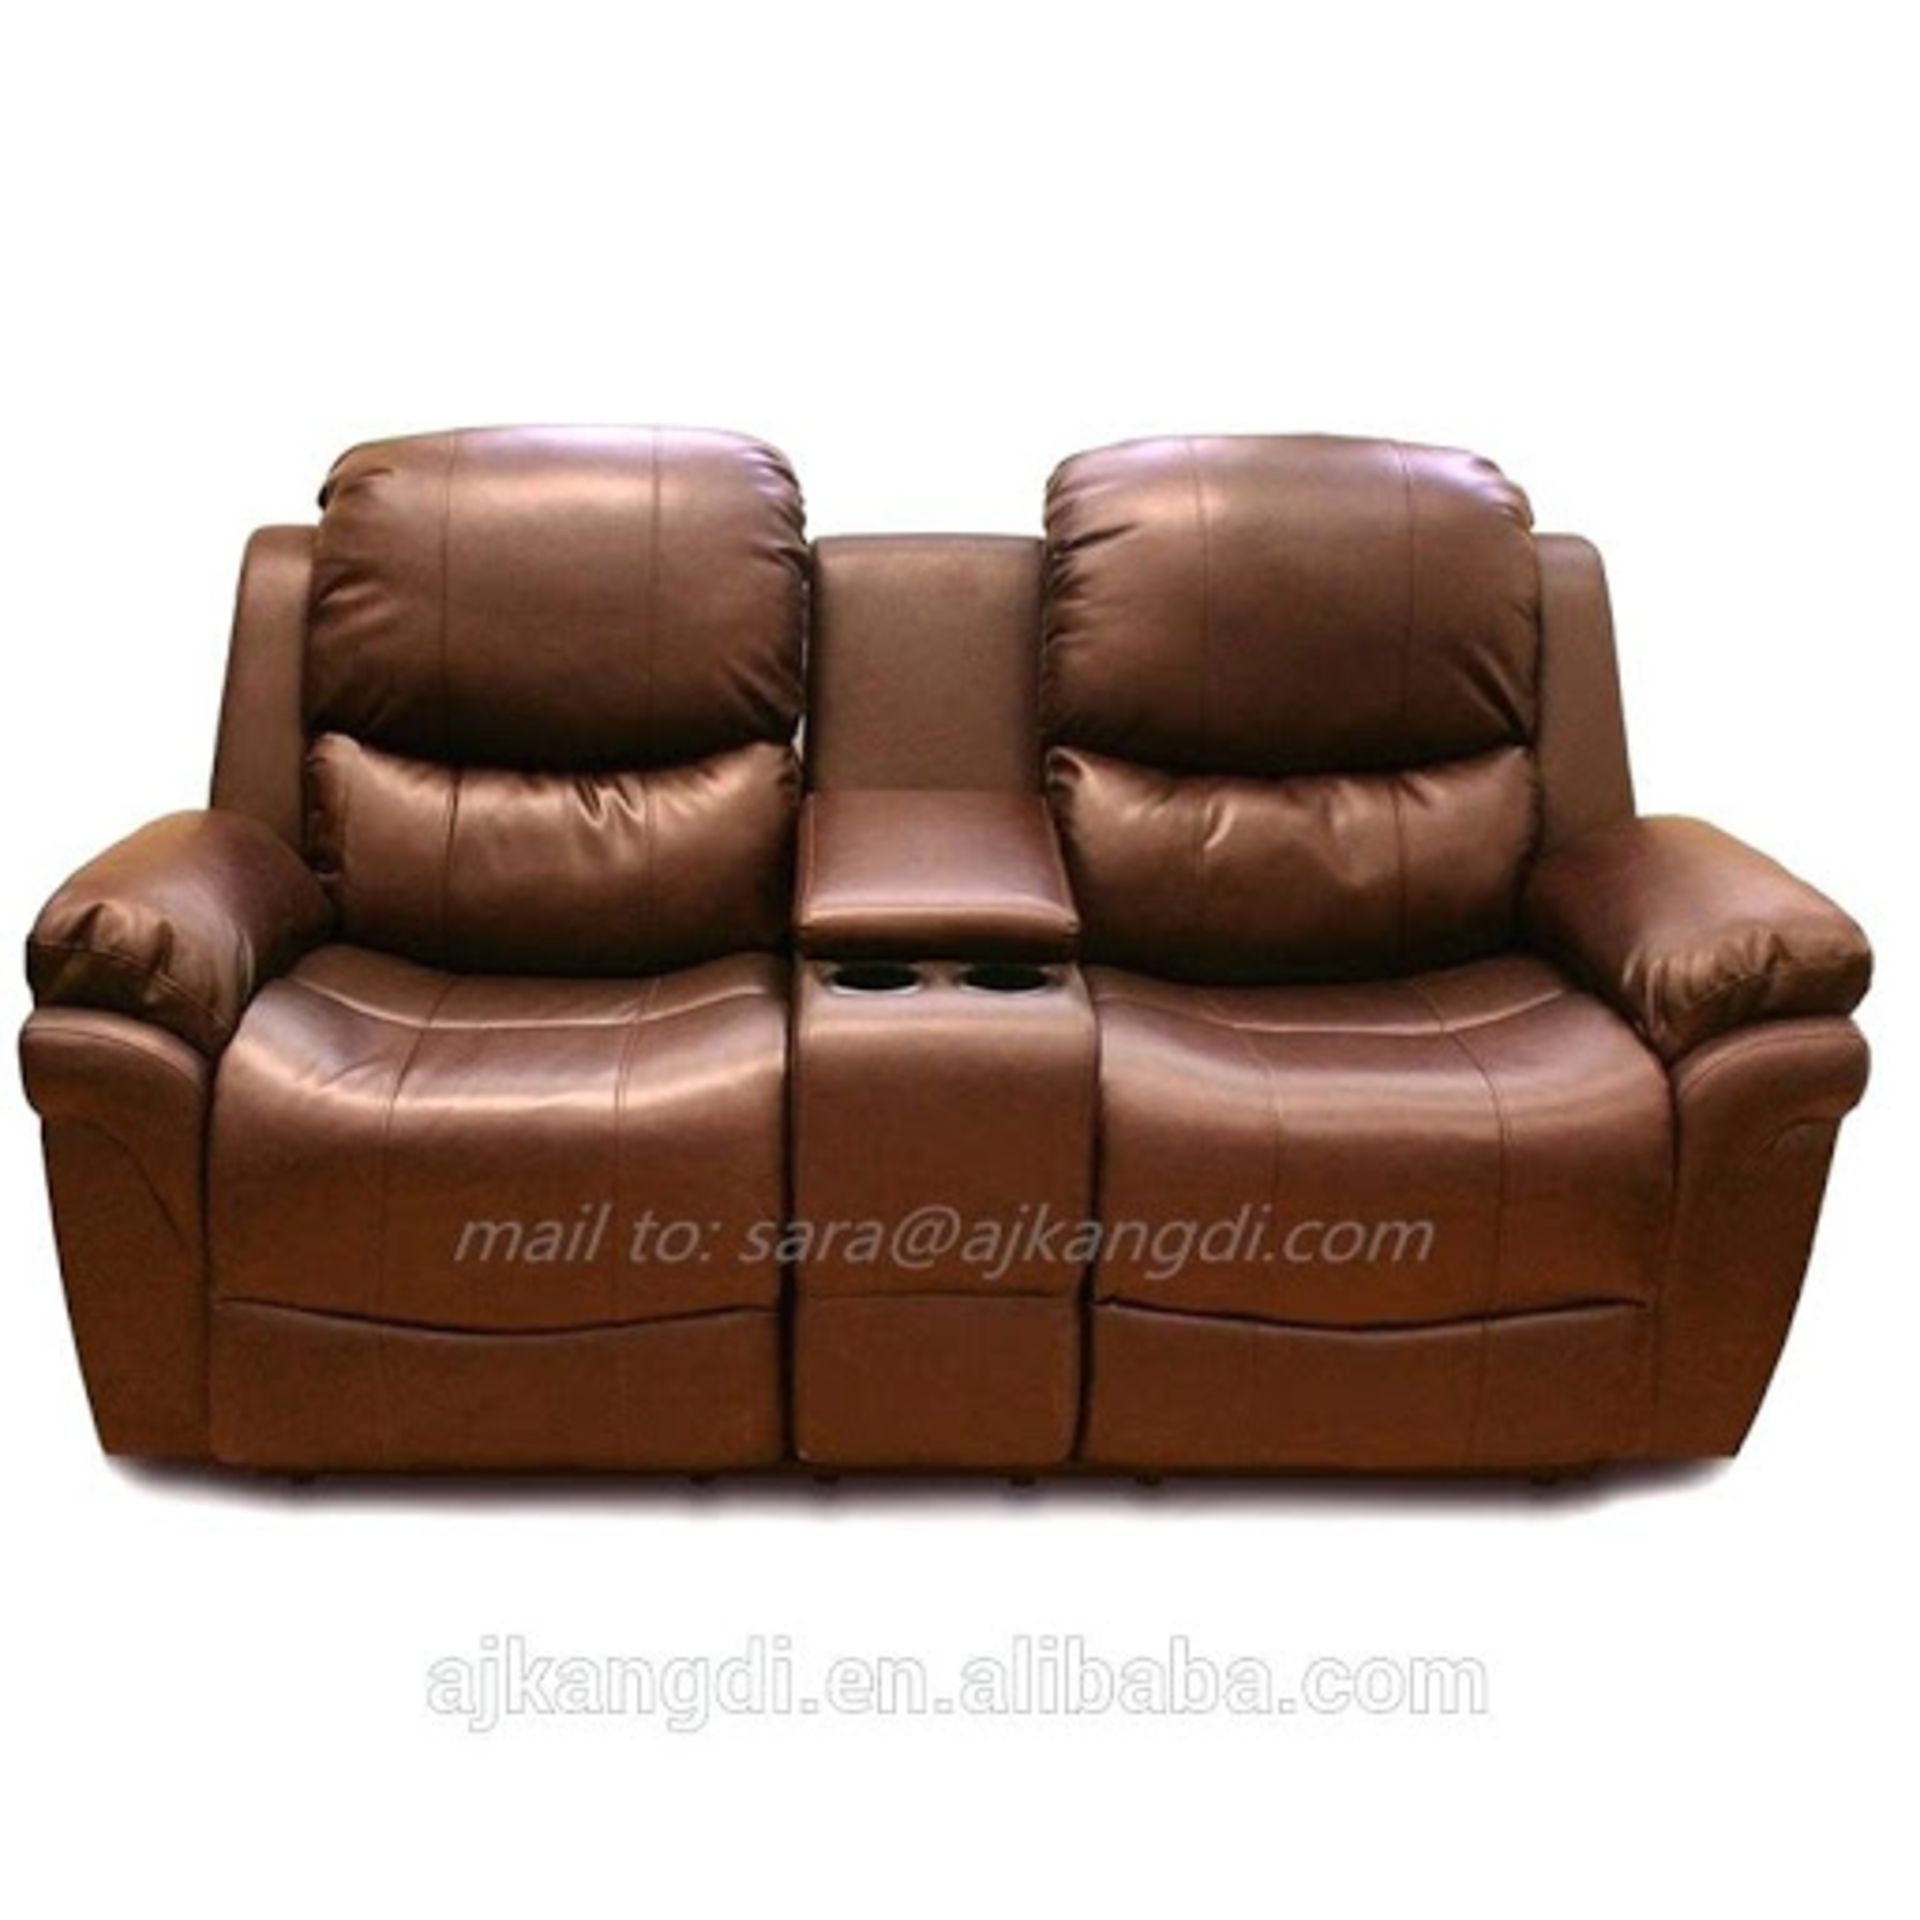 Brand New Boxed Valencia 2 Seater With Console And Drinks Holder In Tan Leather